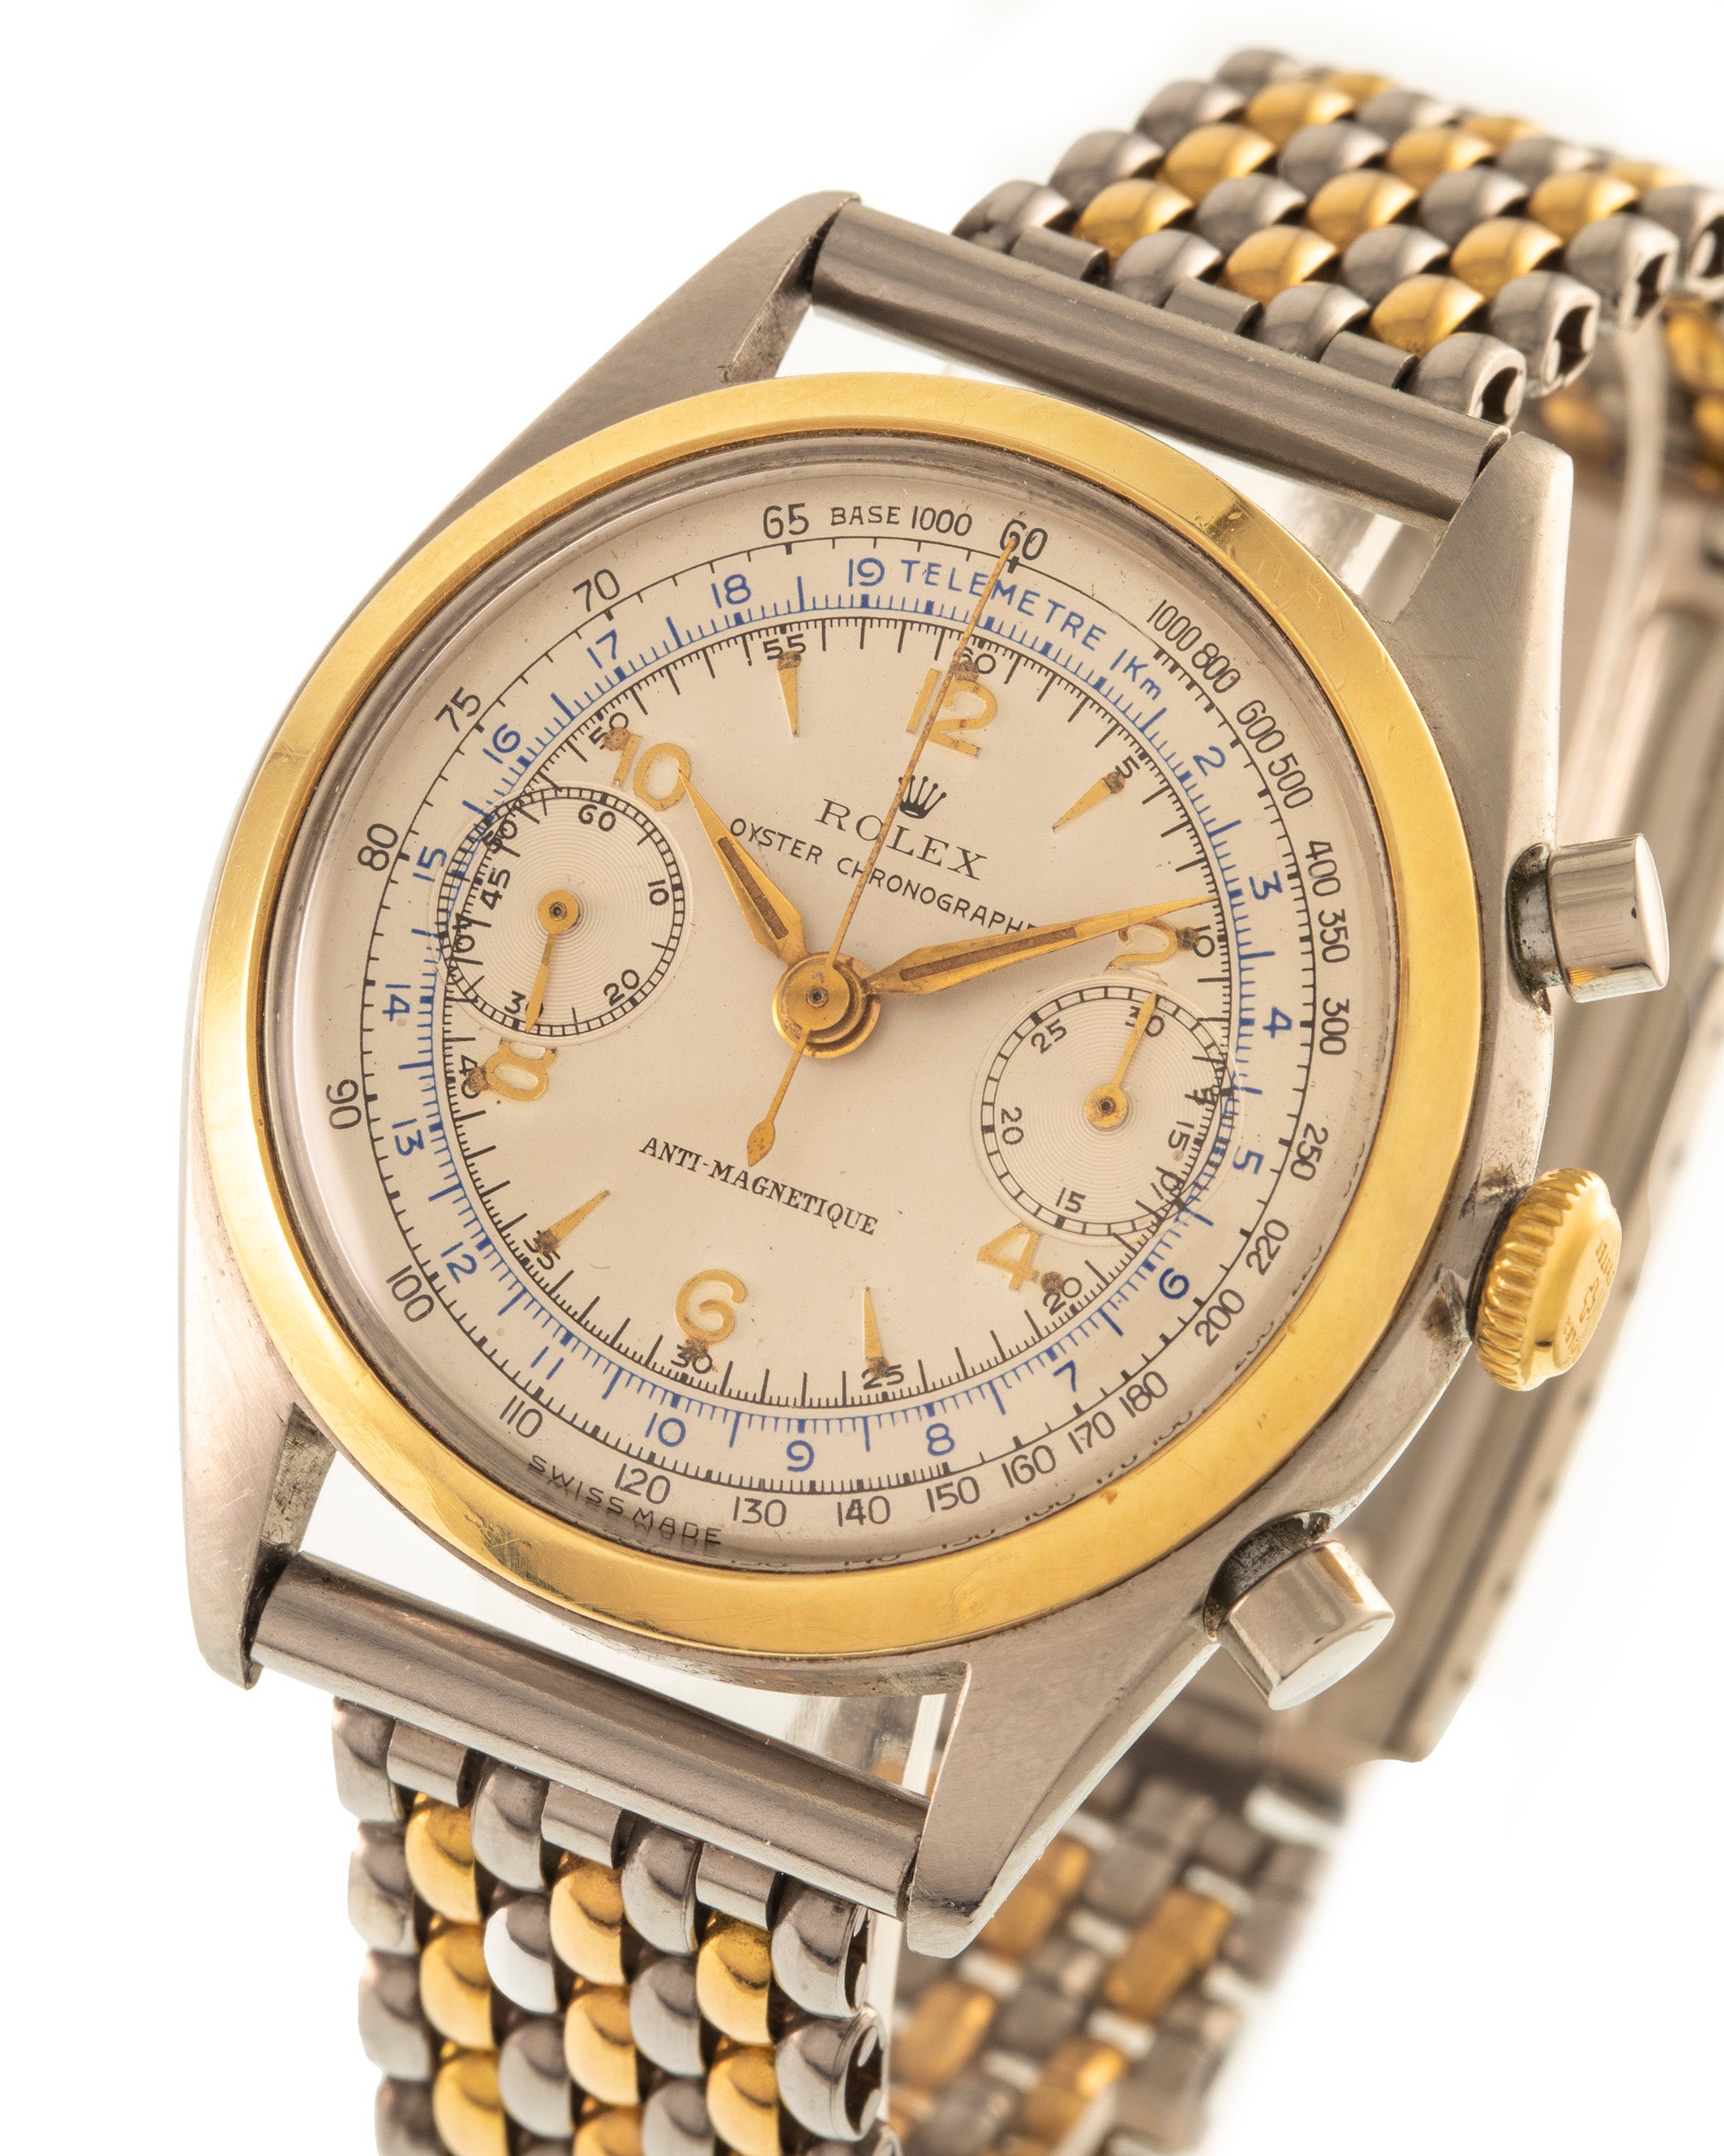 Rolex Chronograph "Monoblocco" Ref. 4500 in steel and gold